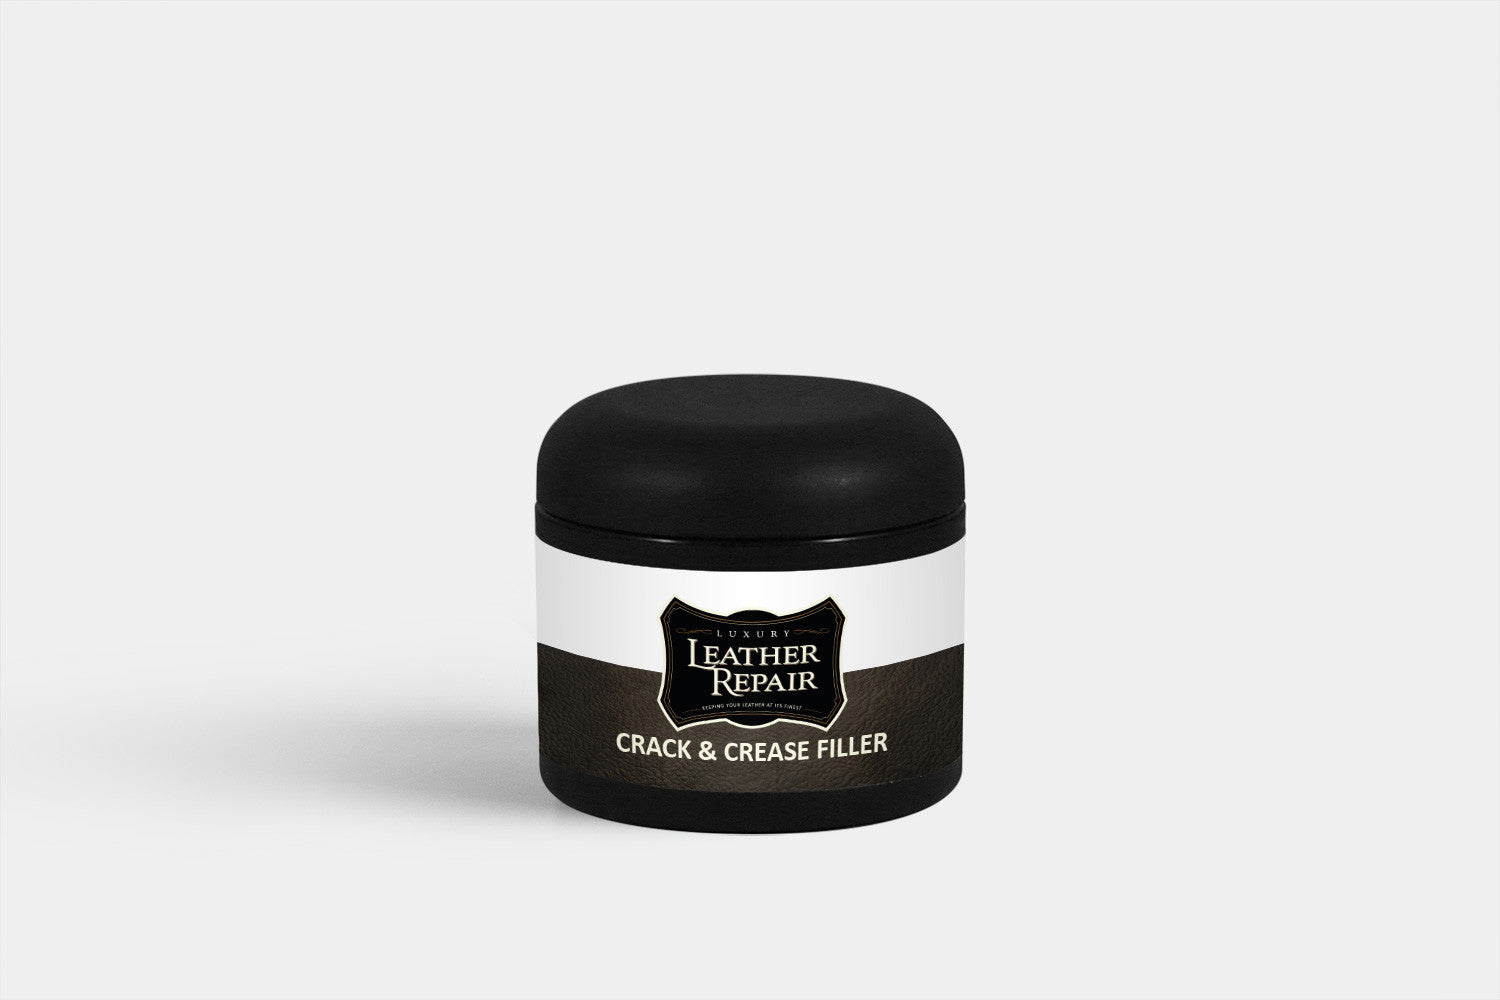 Luxury Leather Repair Crack and Crease Filler